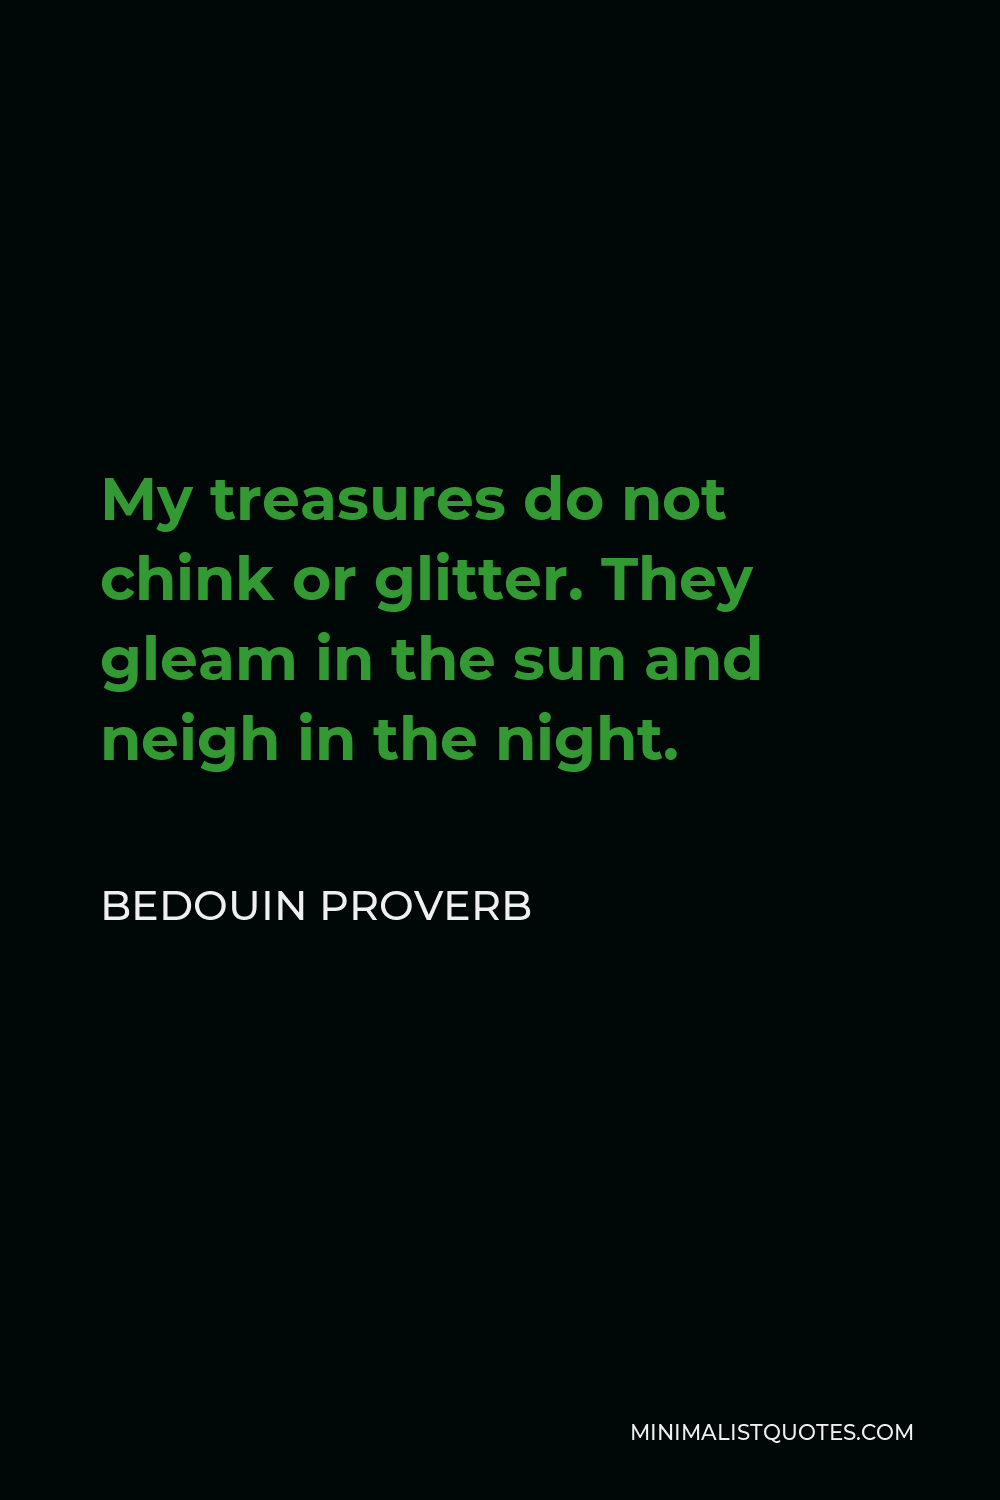 Bedouin Proverb Quote - My treasures do not chink or glitter. They gleam in the sun and neigh in the night.